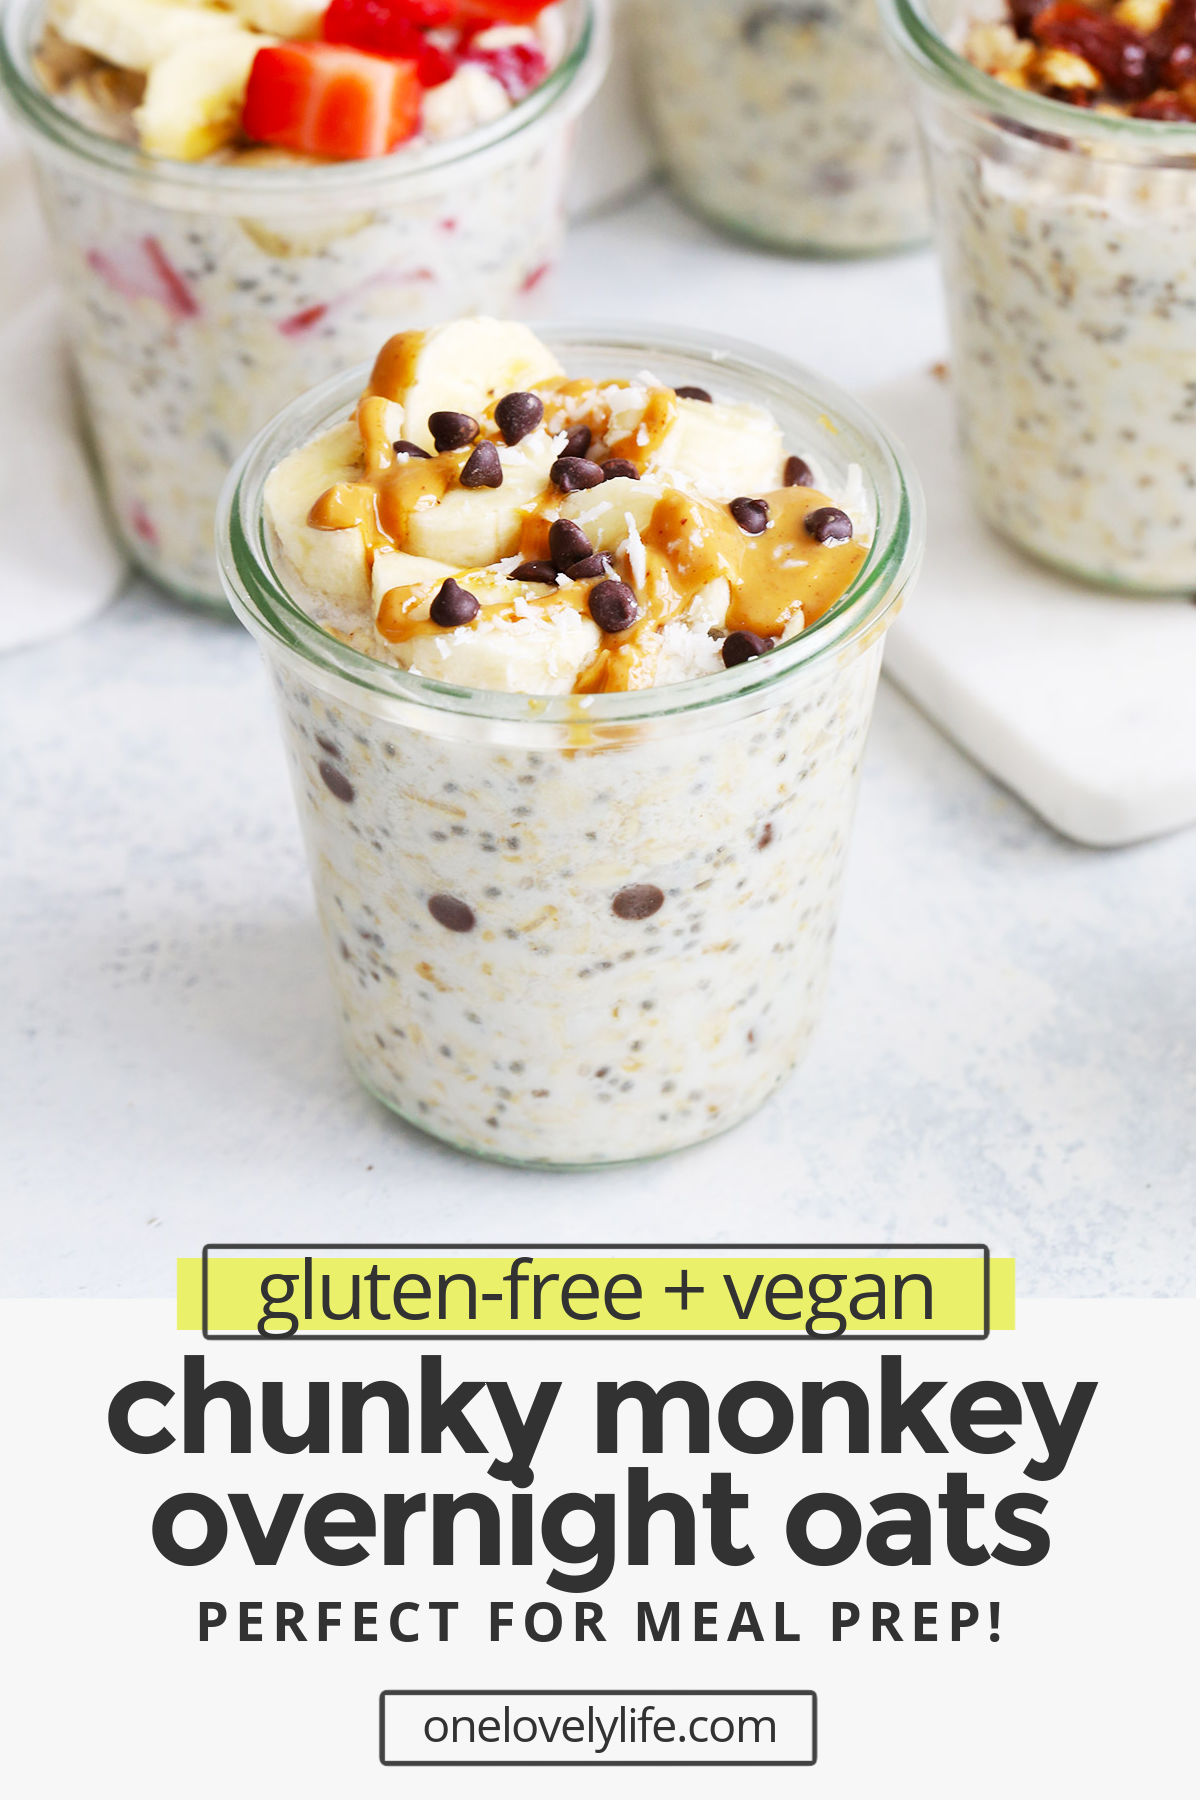 Chunky Monkey Overnight Oats - Creamy peanut butter banana overnight oats with a little sprinkle of coconut and chocolate on top. You'll LOVE this make-ahead breakfast! (Gluten-free, vegan) // Meal Prep Breakfast // Peanut Butter Banana Overnight Oats // Healthy Breakfast // Chunky Monkey Overnight Oatmeal // Peanut Butter Overnight Oats